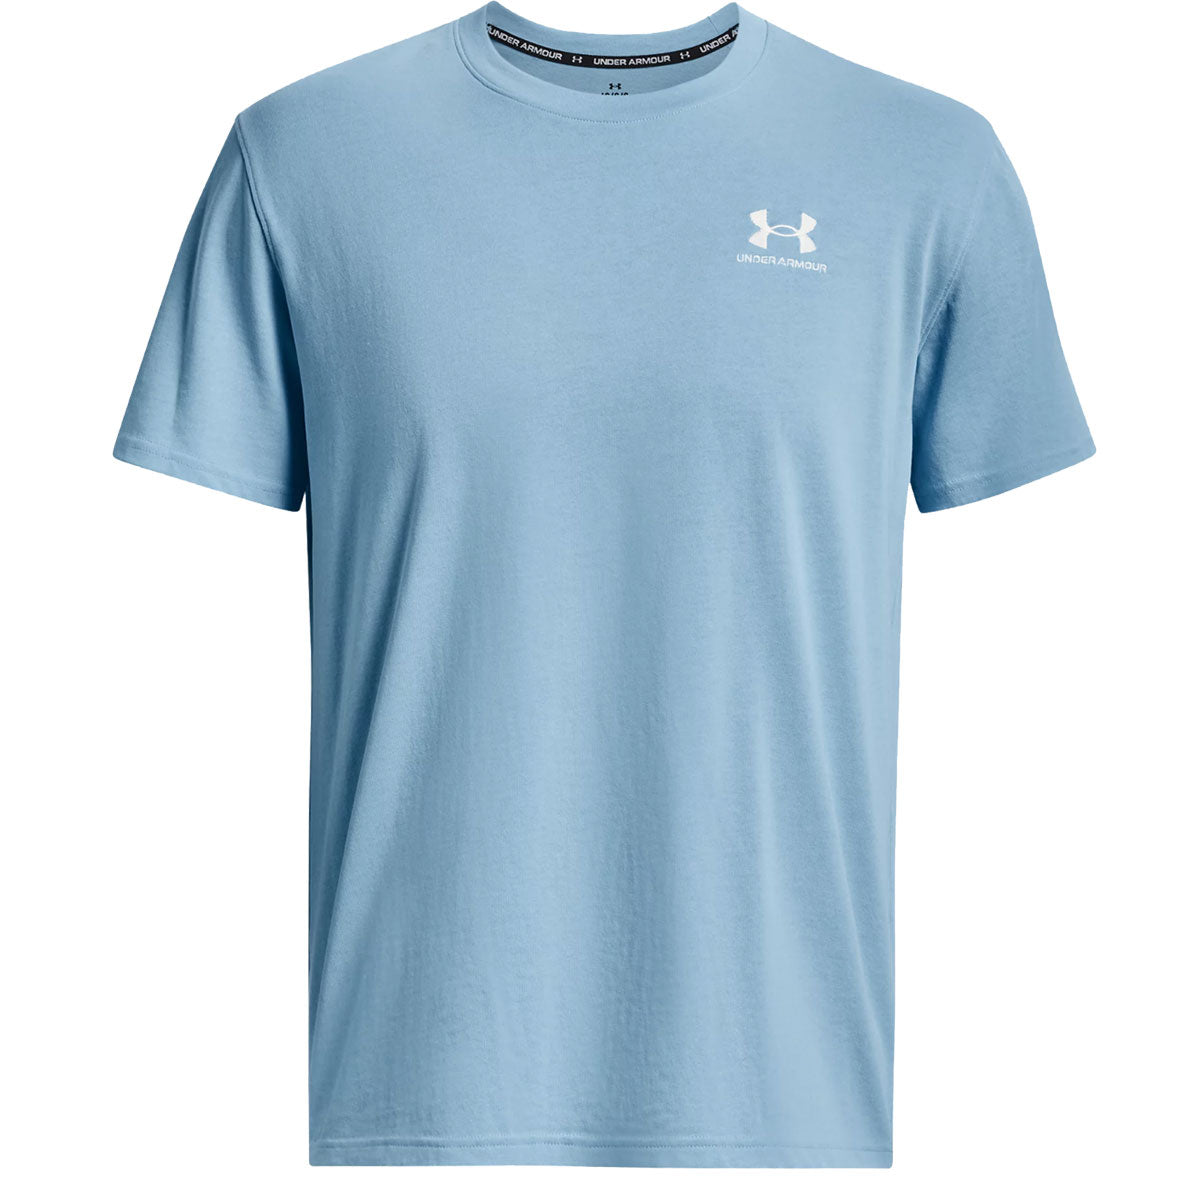 Under Armour Logo Embroidered Heavyweight Tee - Mens - Blizzard/White